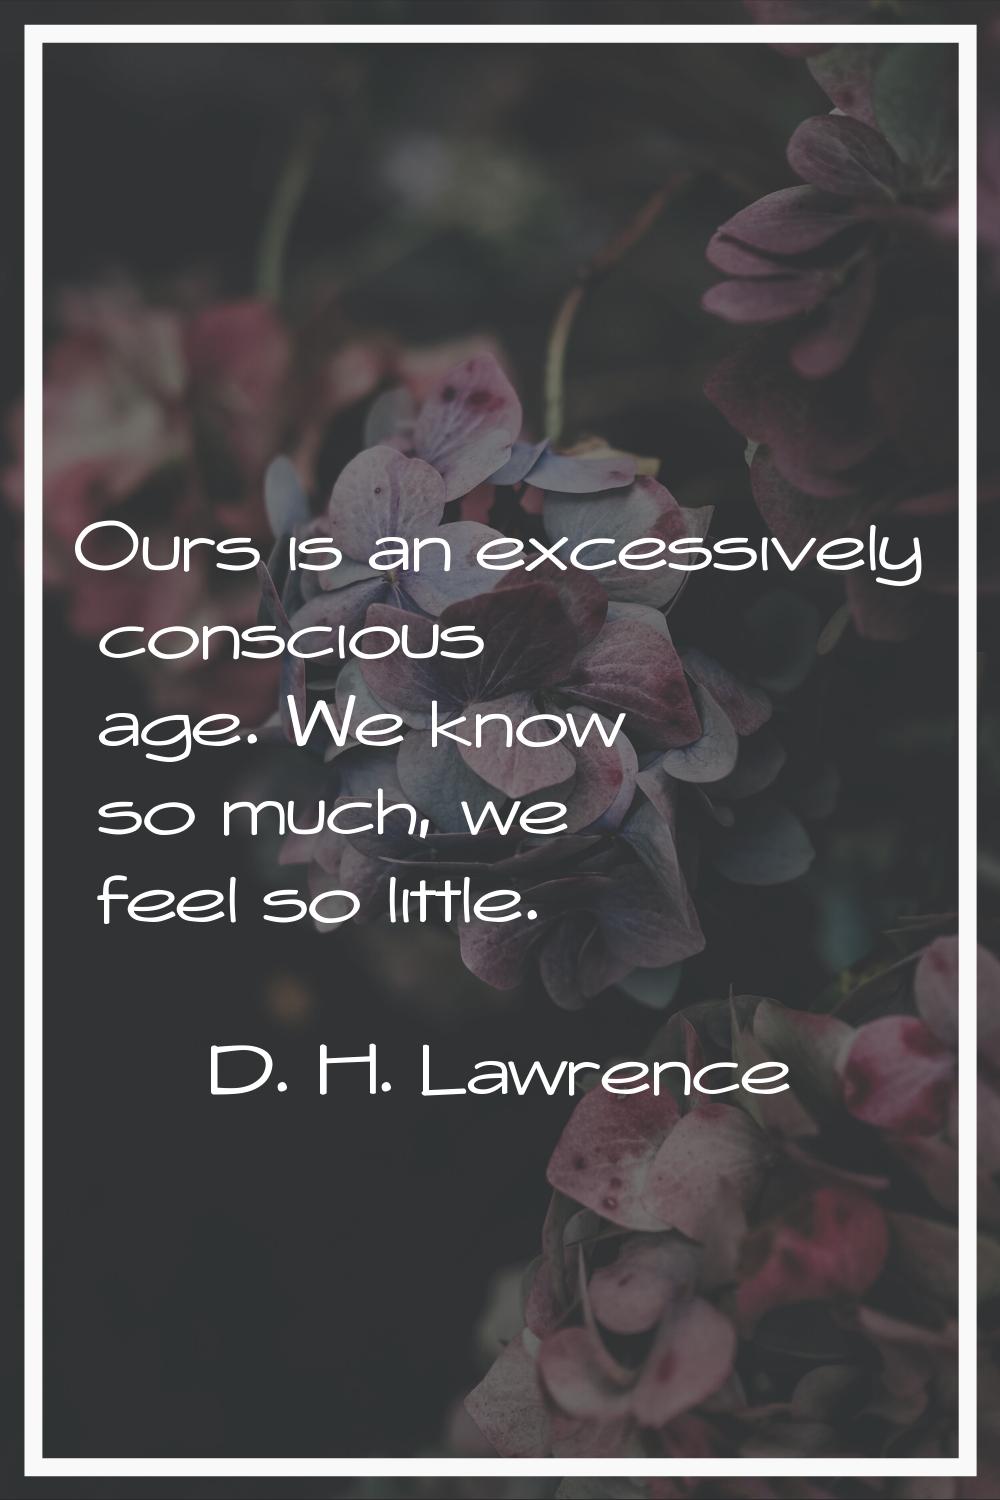 Ours is an excessively conscious age. We know so much, we feel so little.